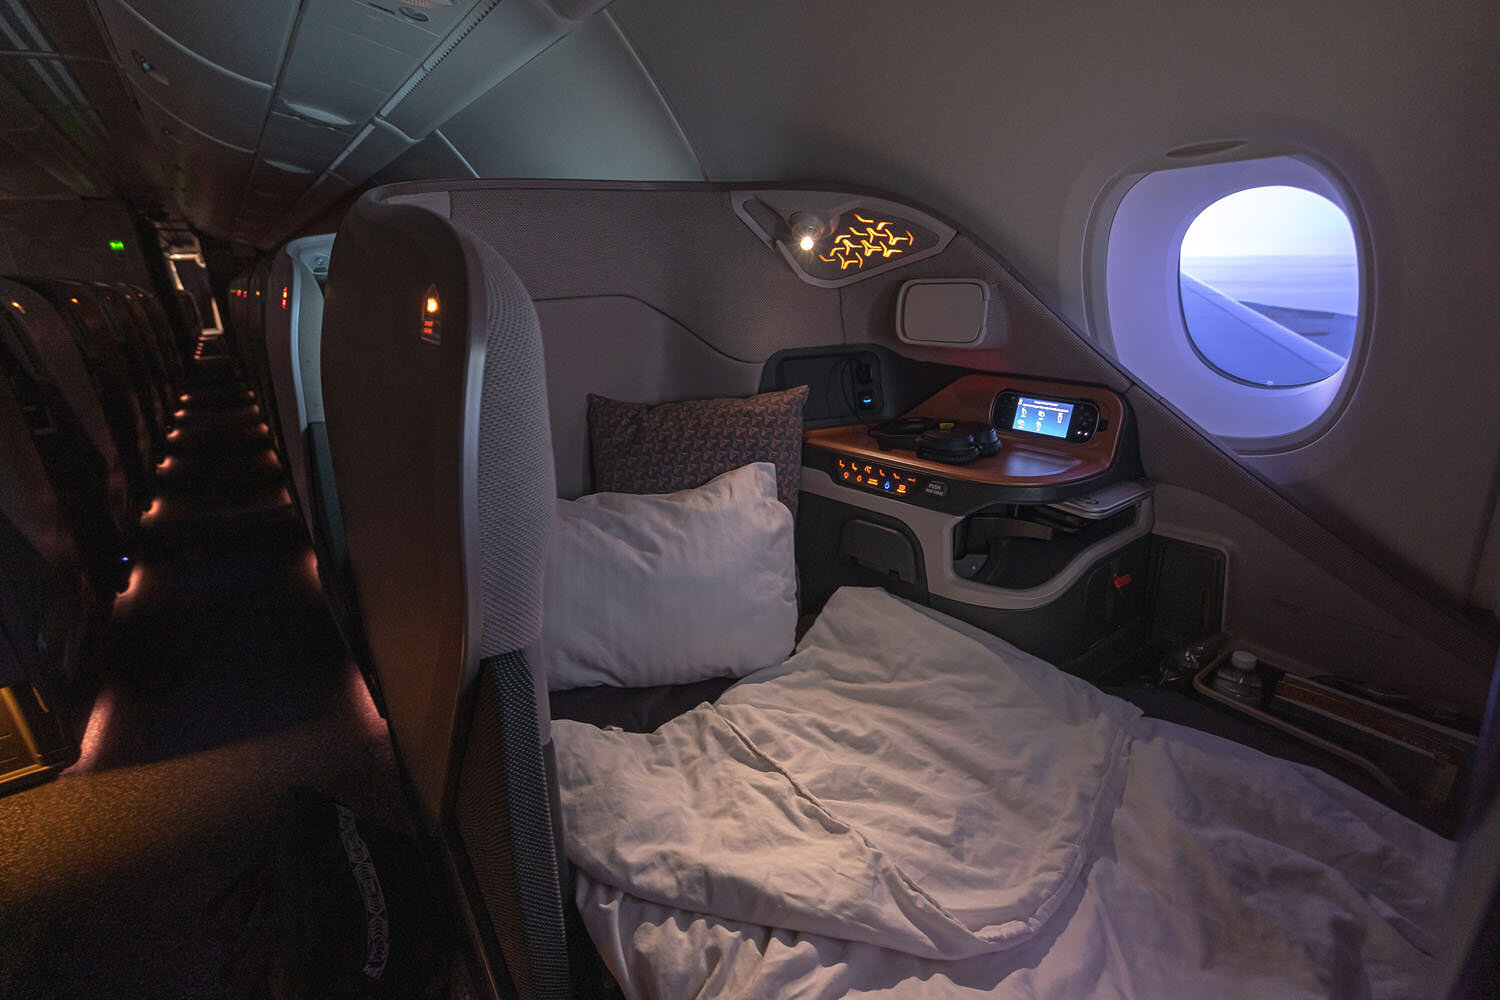 Singapore Airlines 2017 seat in Bed Mode